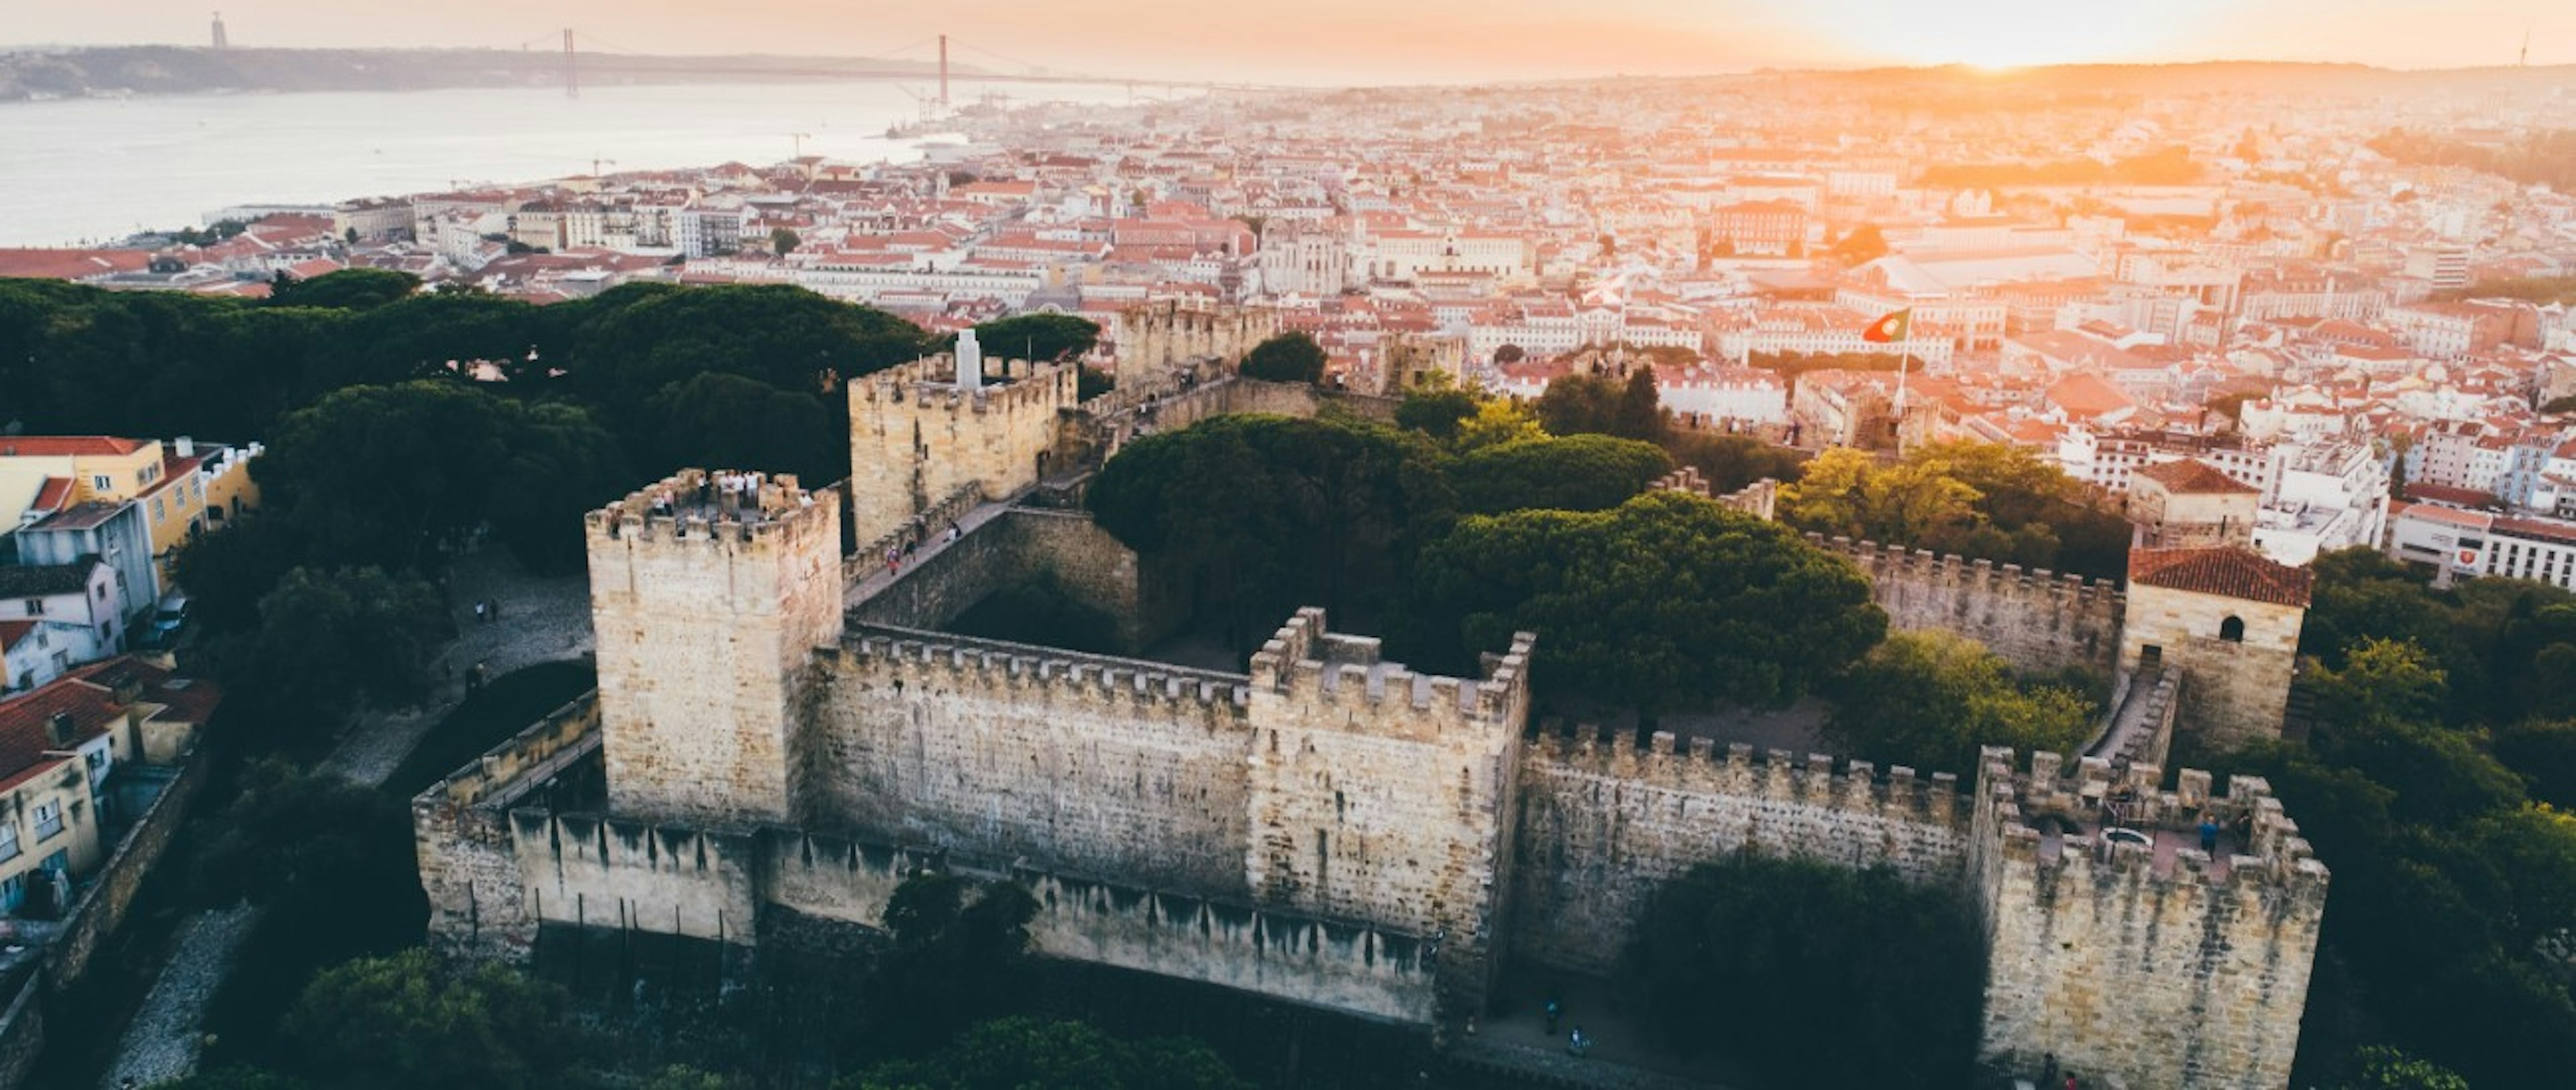 aerial view of fortress on hill in Lisbon at sunset